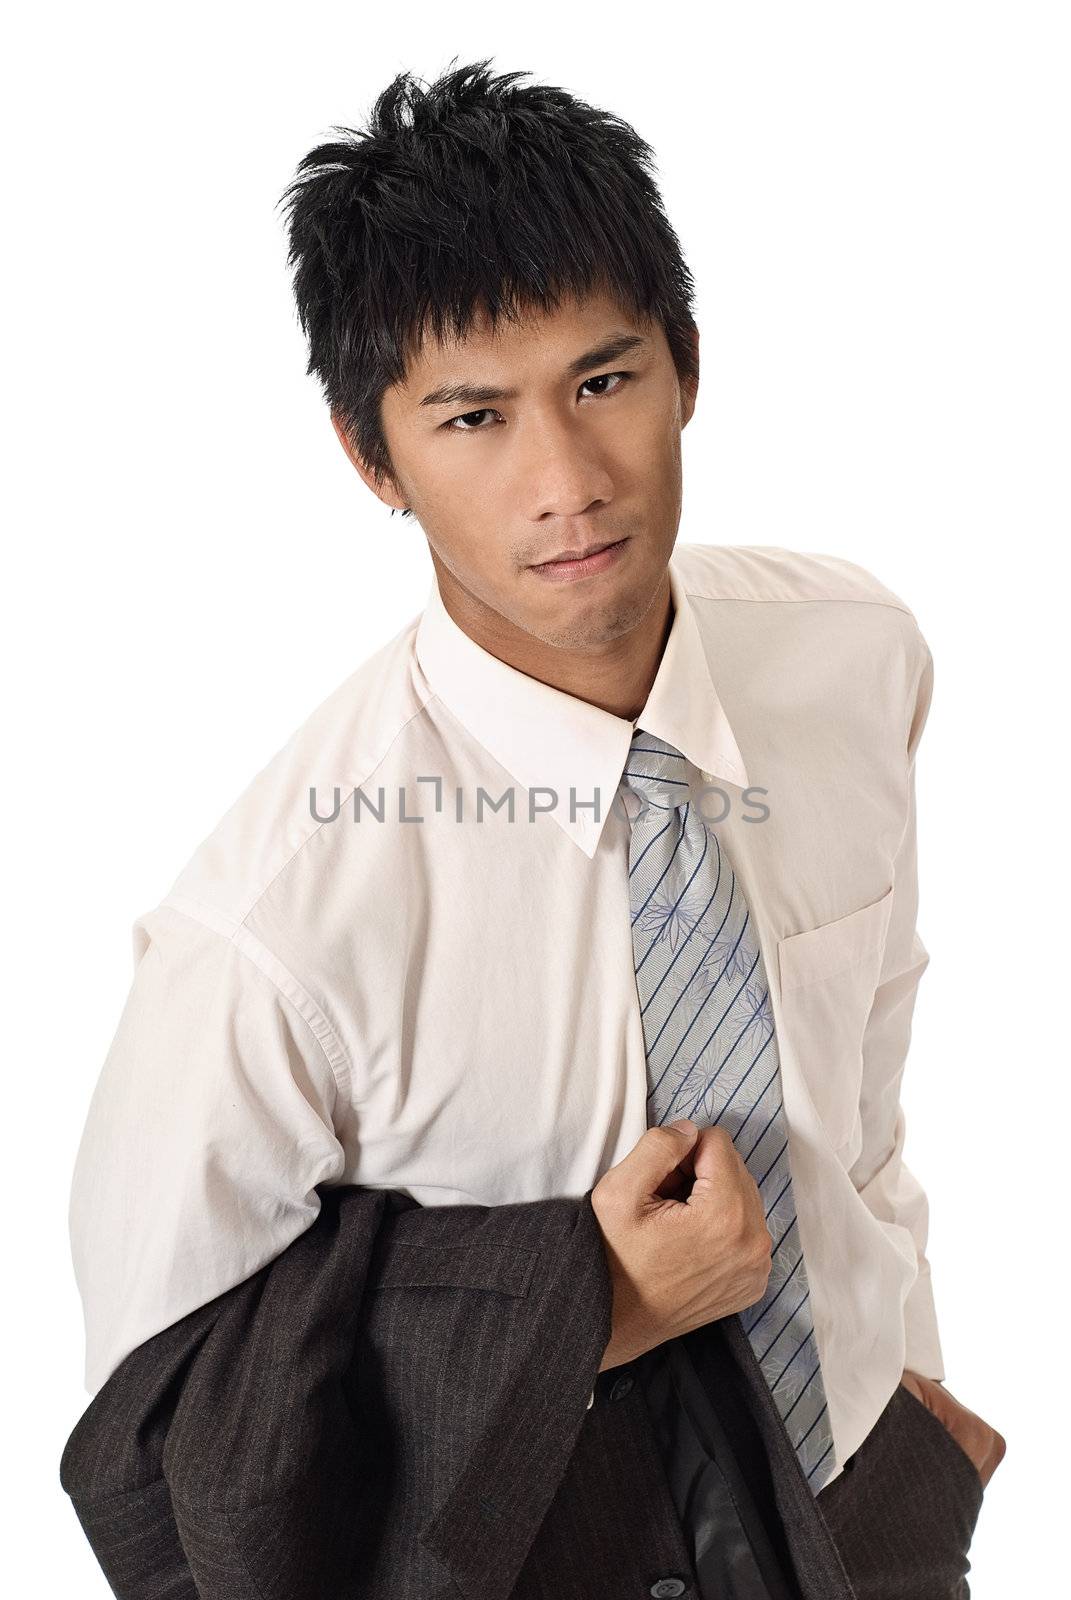 Young businessman holding coat with confident expression on face on white background.